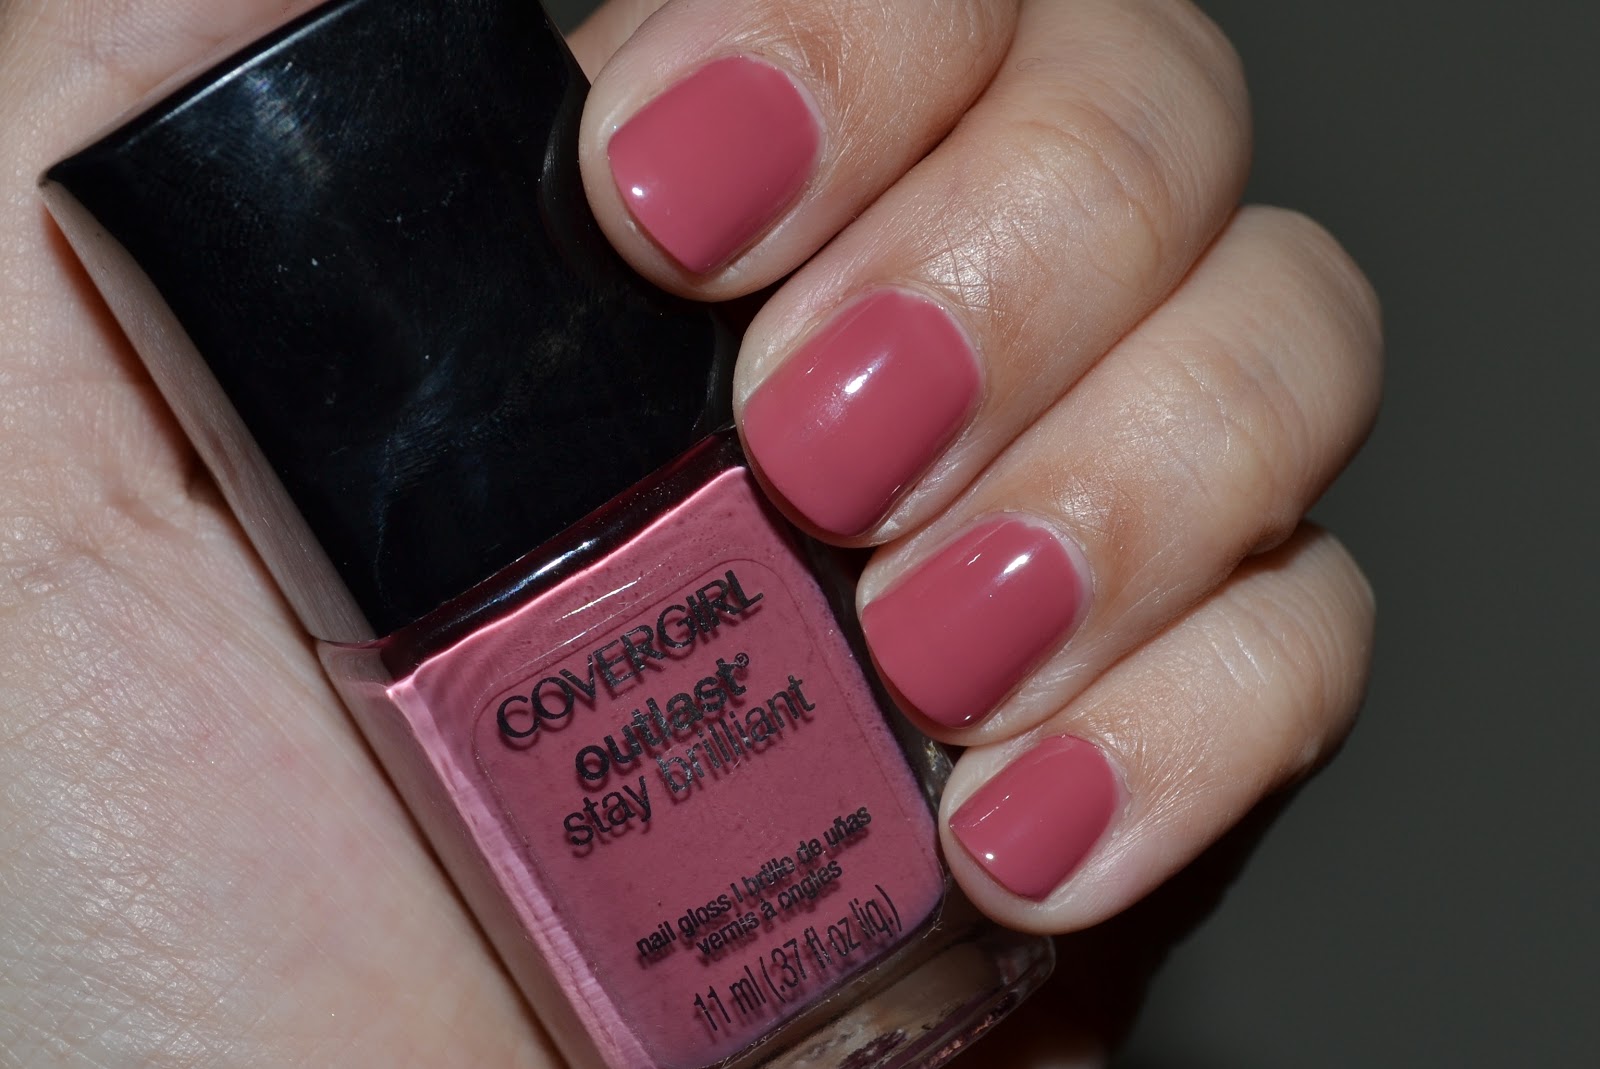 9. Covergirl Outlast Stay Brilliant Nail Gloss in "Sunkissed" - wide 2